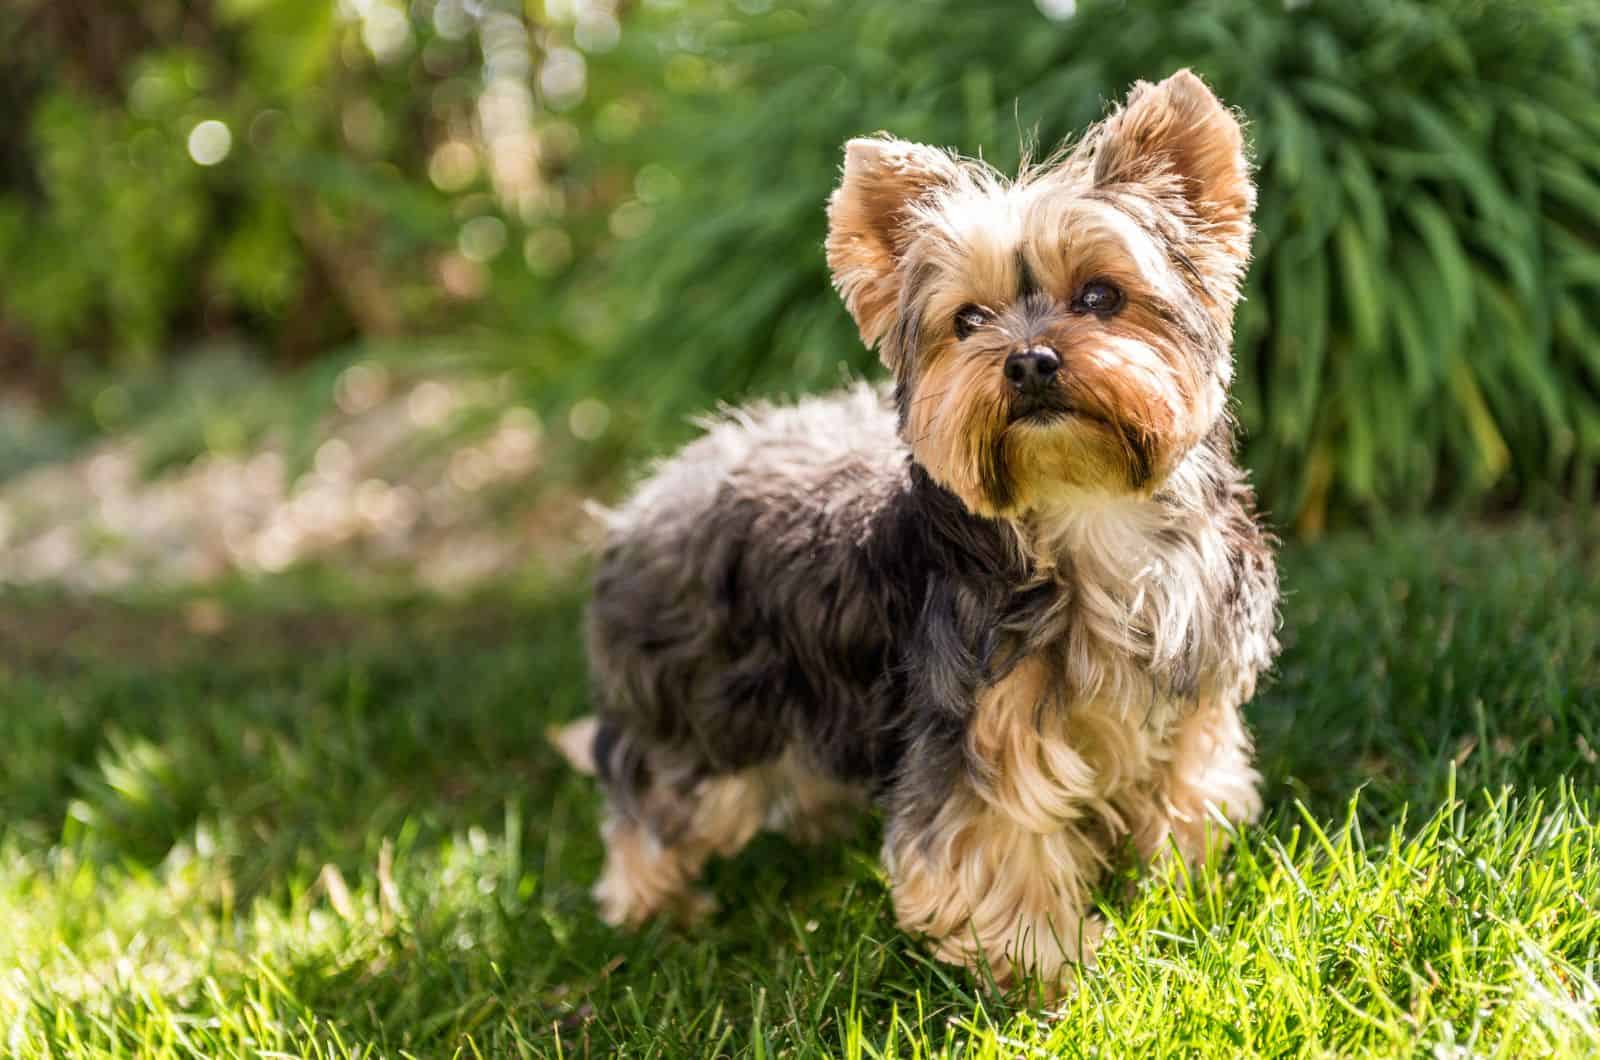 Yorkie stanidng on grass outside